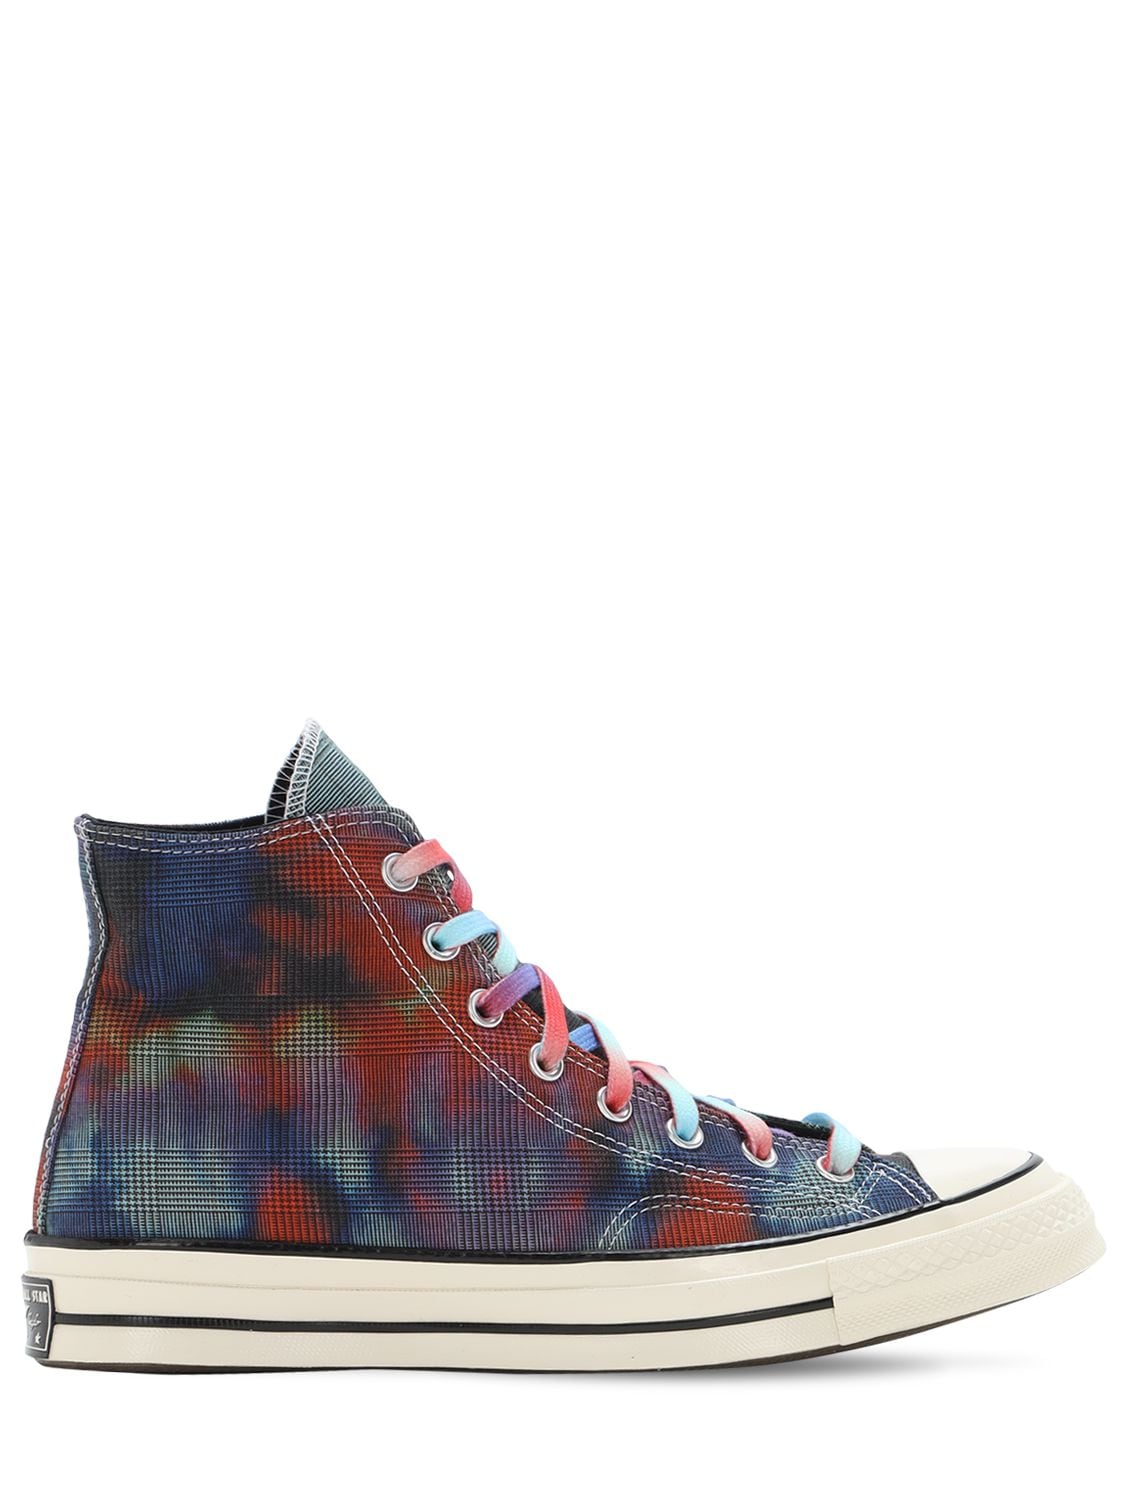 plaid high top sneakers